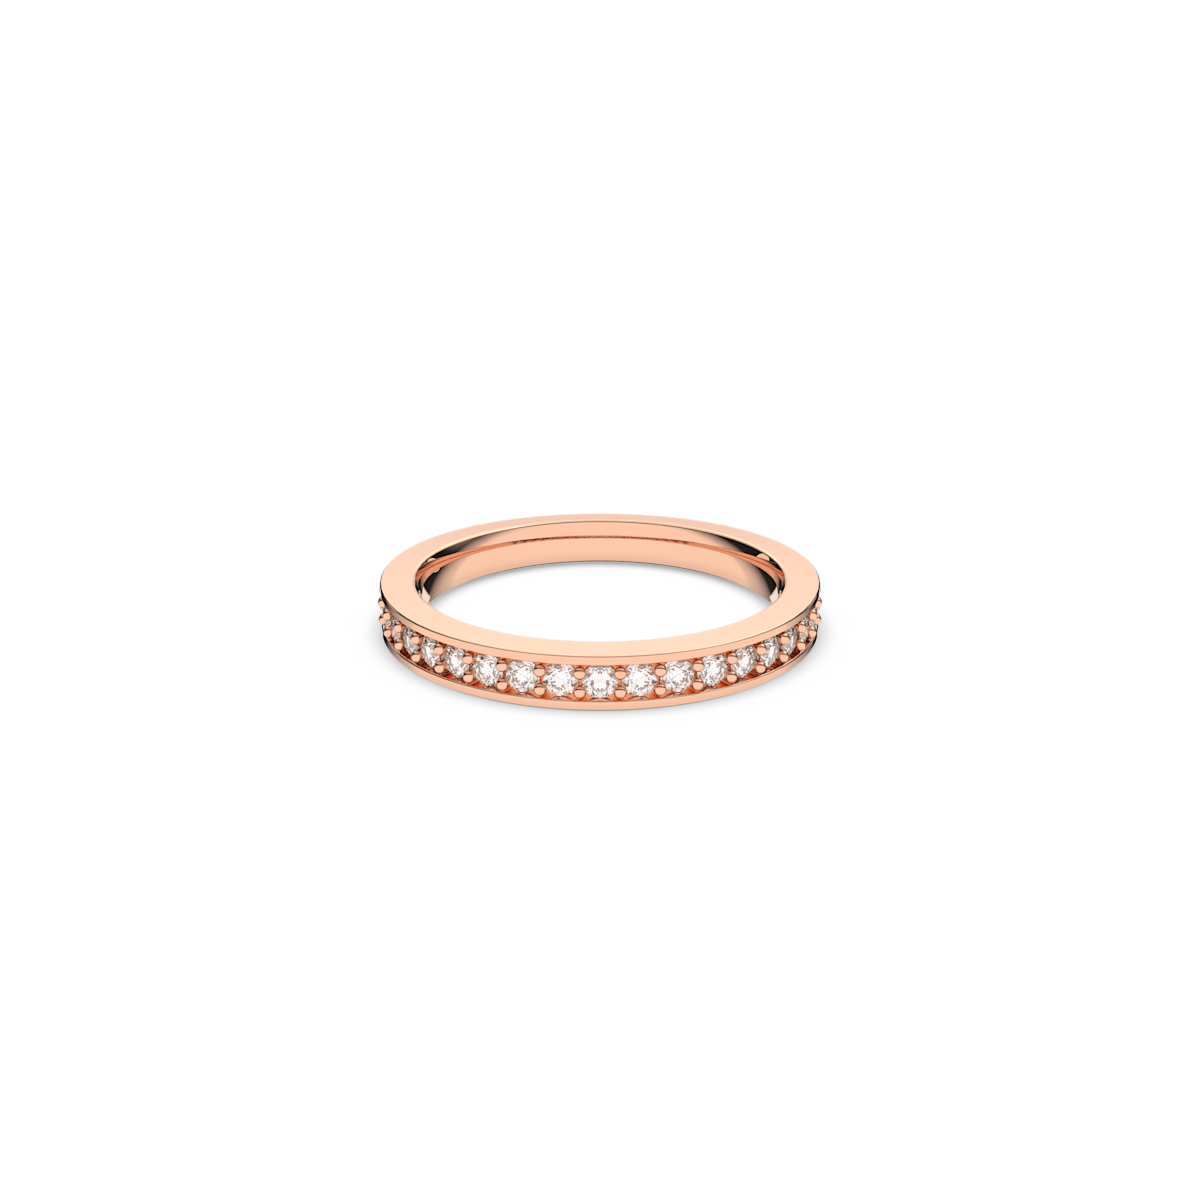 Rare ring, White, Rose gold-tone plated